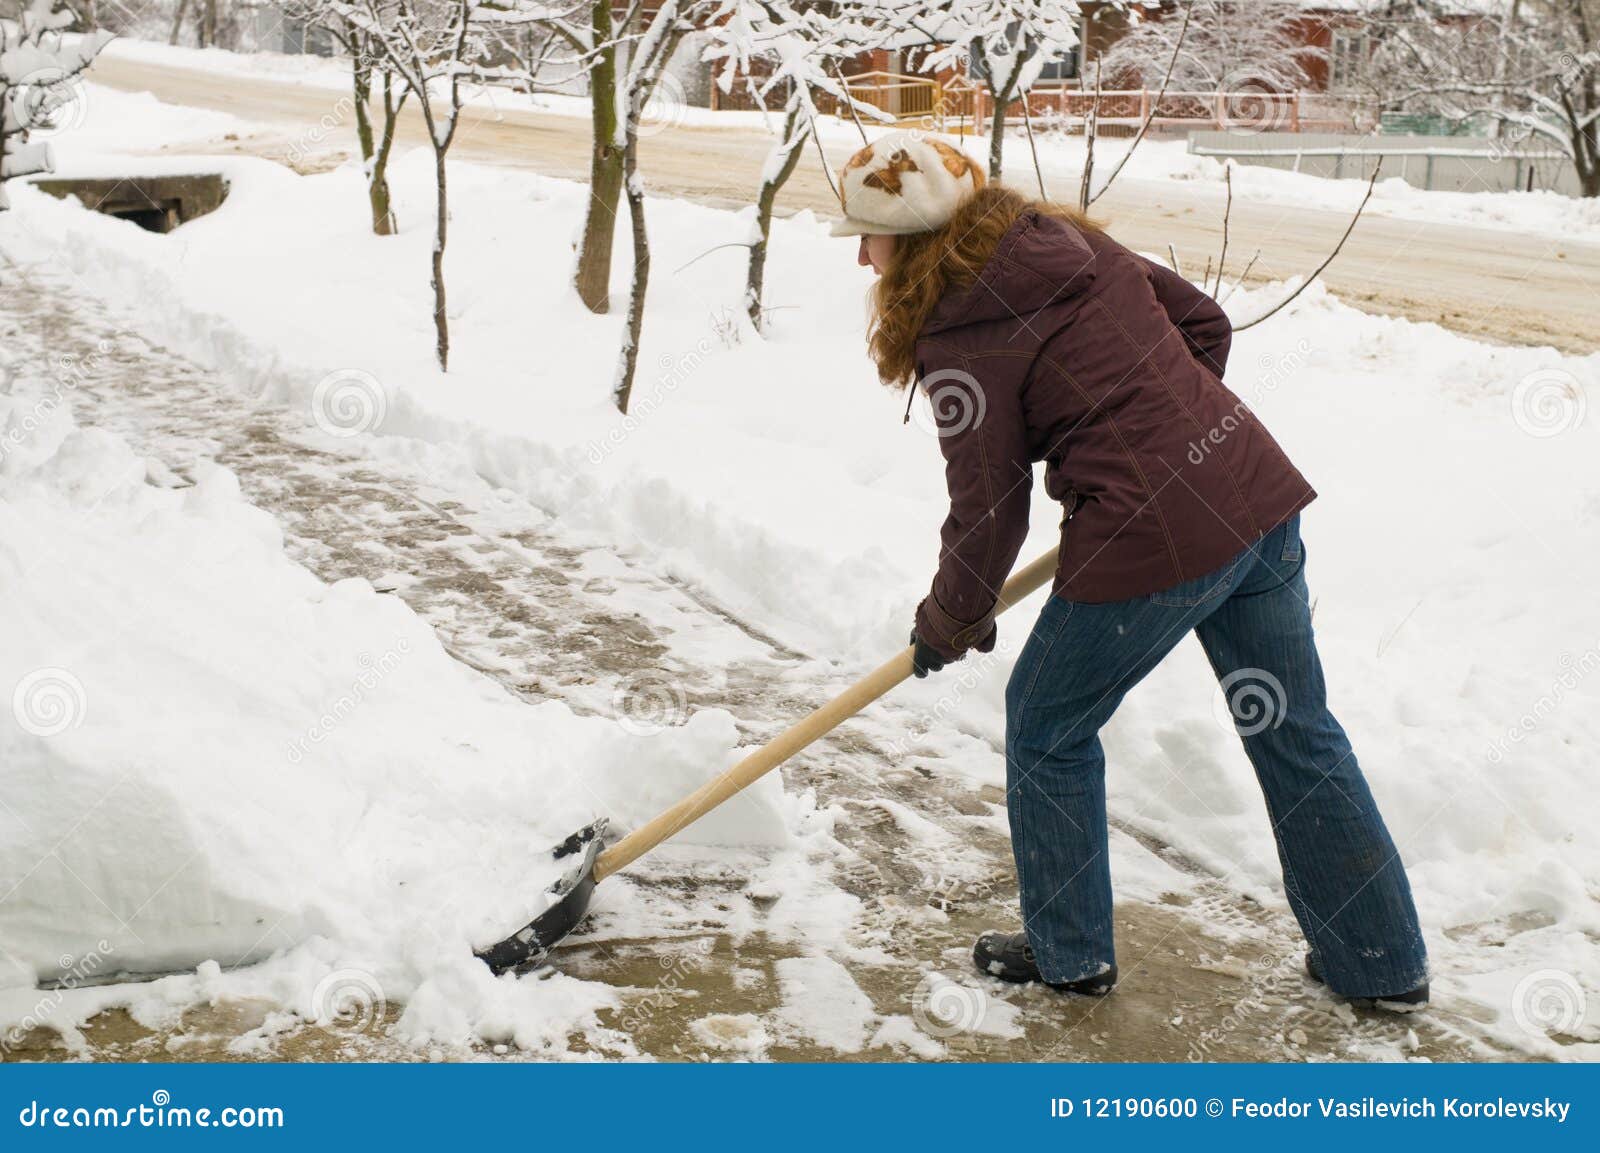 the woman cleans snow.